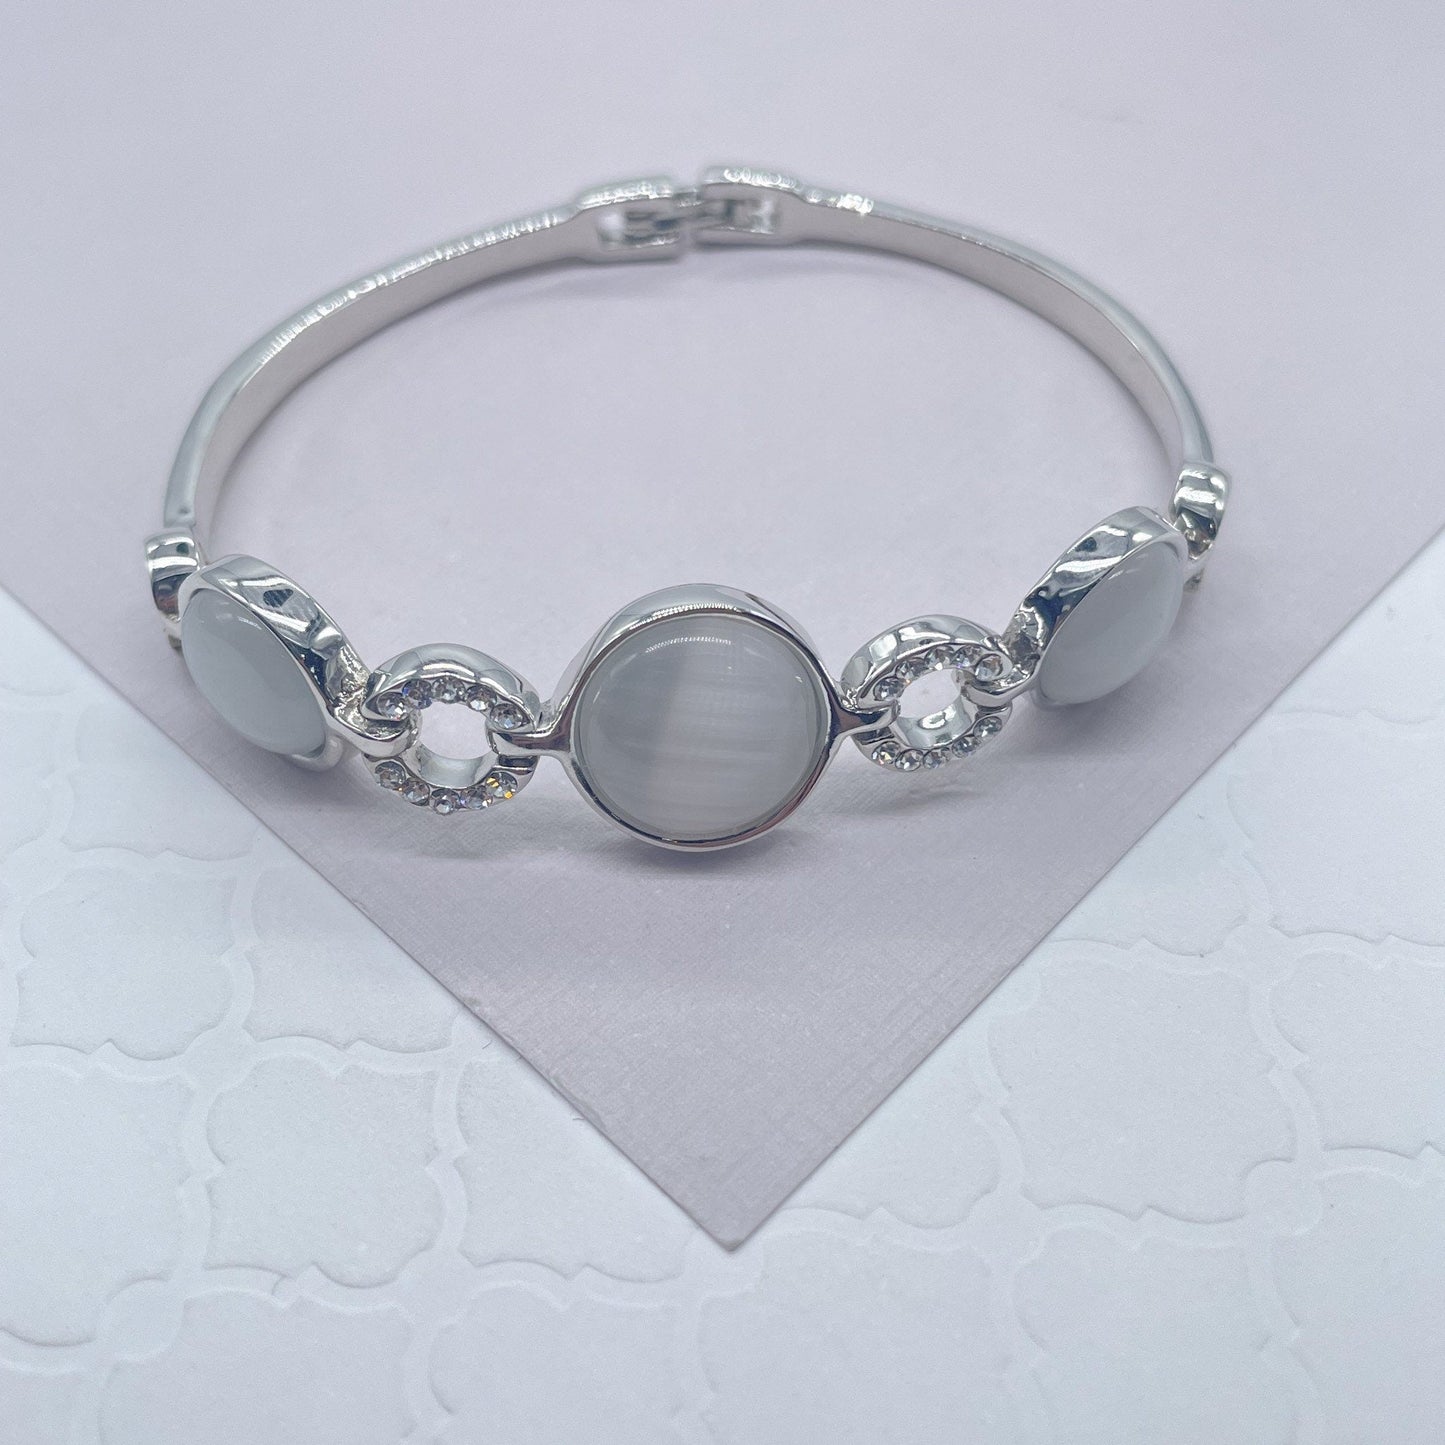 Silver Layered Cuff Bracelet with Milky White Colored Stones and Zirconia Setting